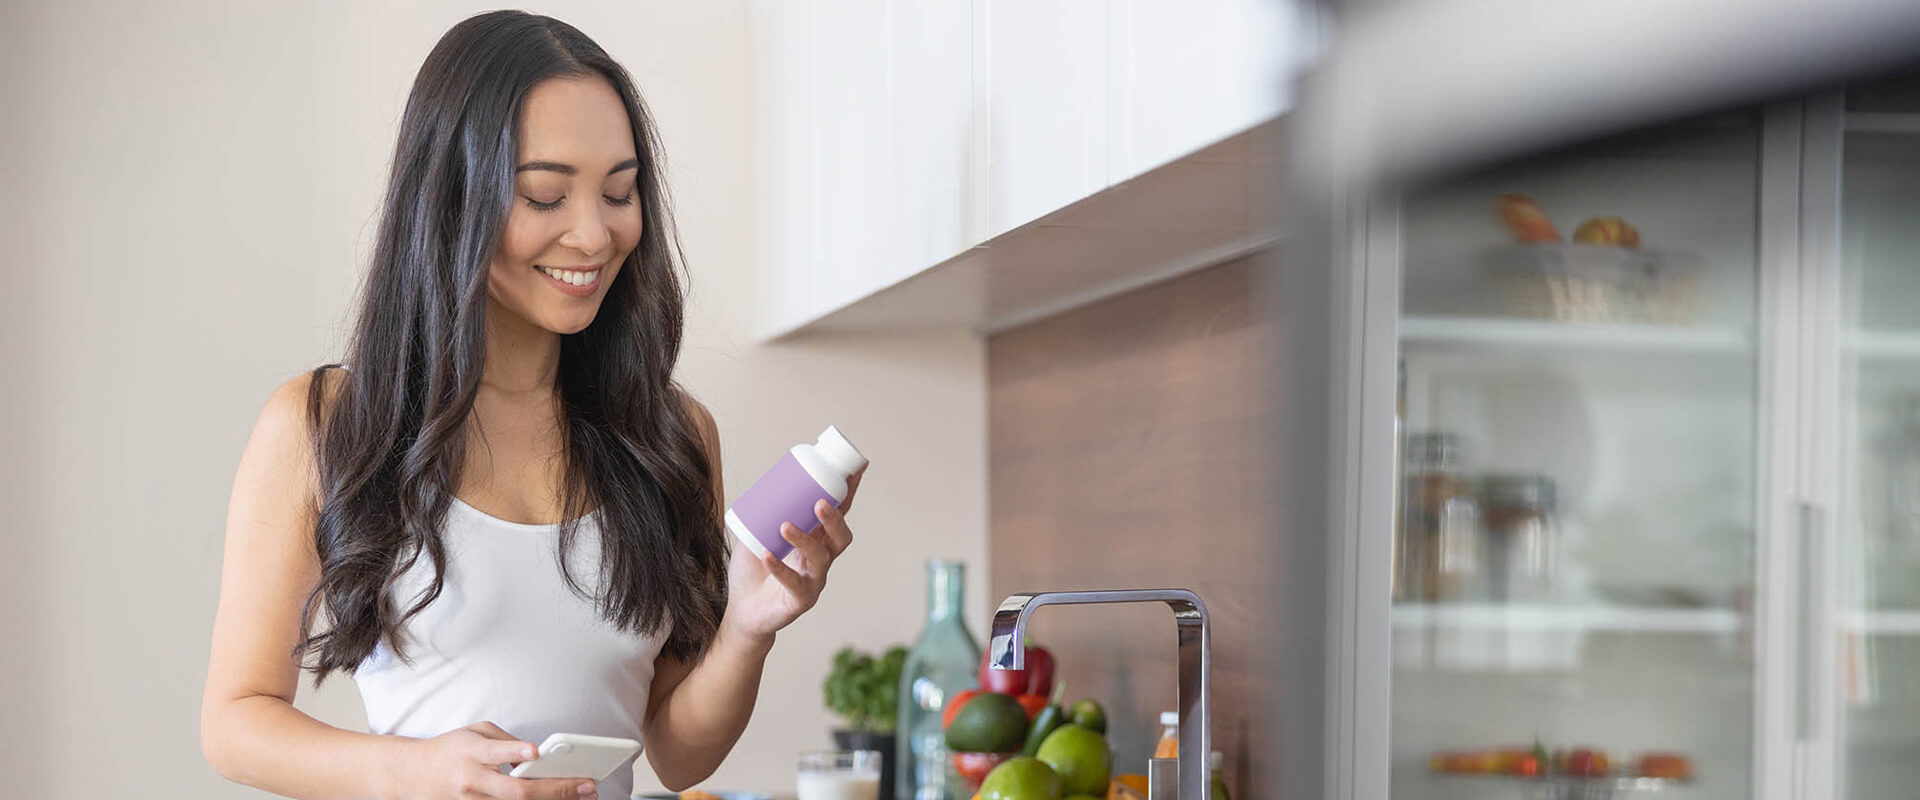 EVERYDAY ESSENTIALS VITAMINS FOR THE SUPER WOMAN